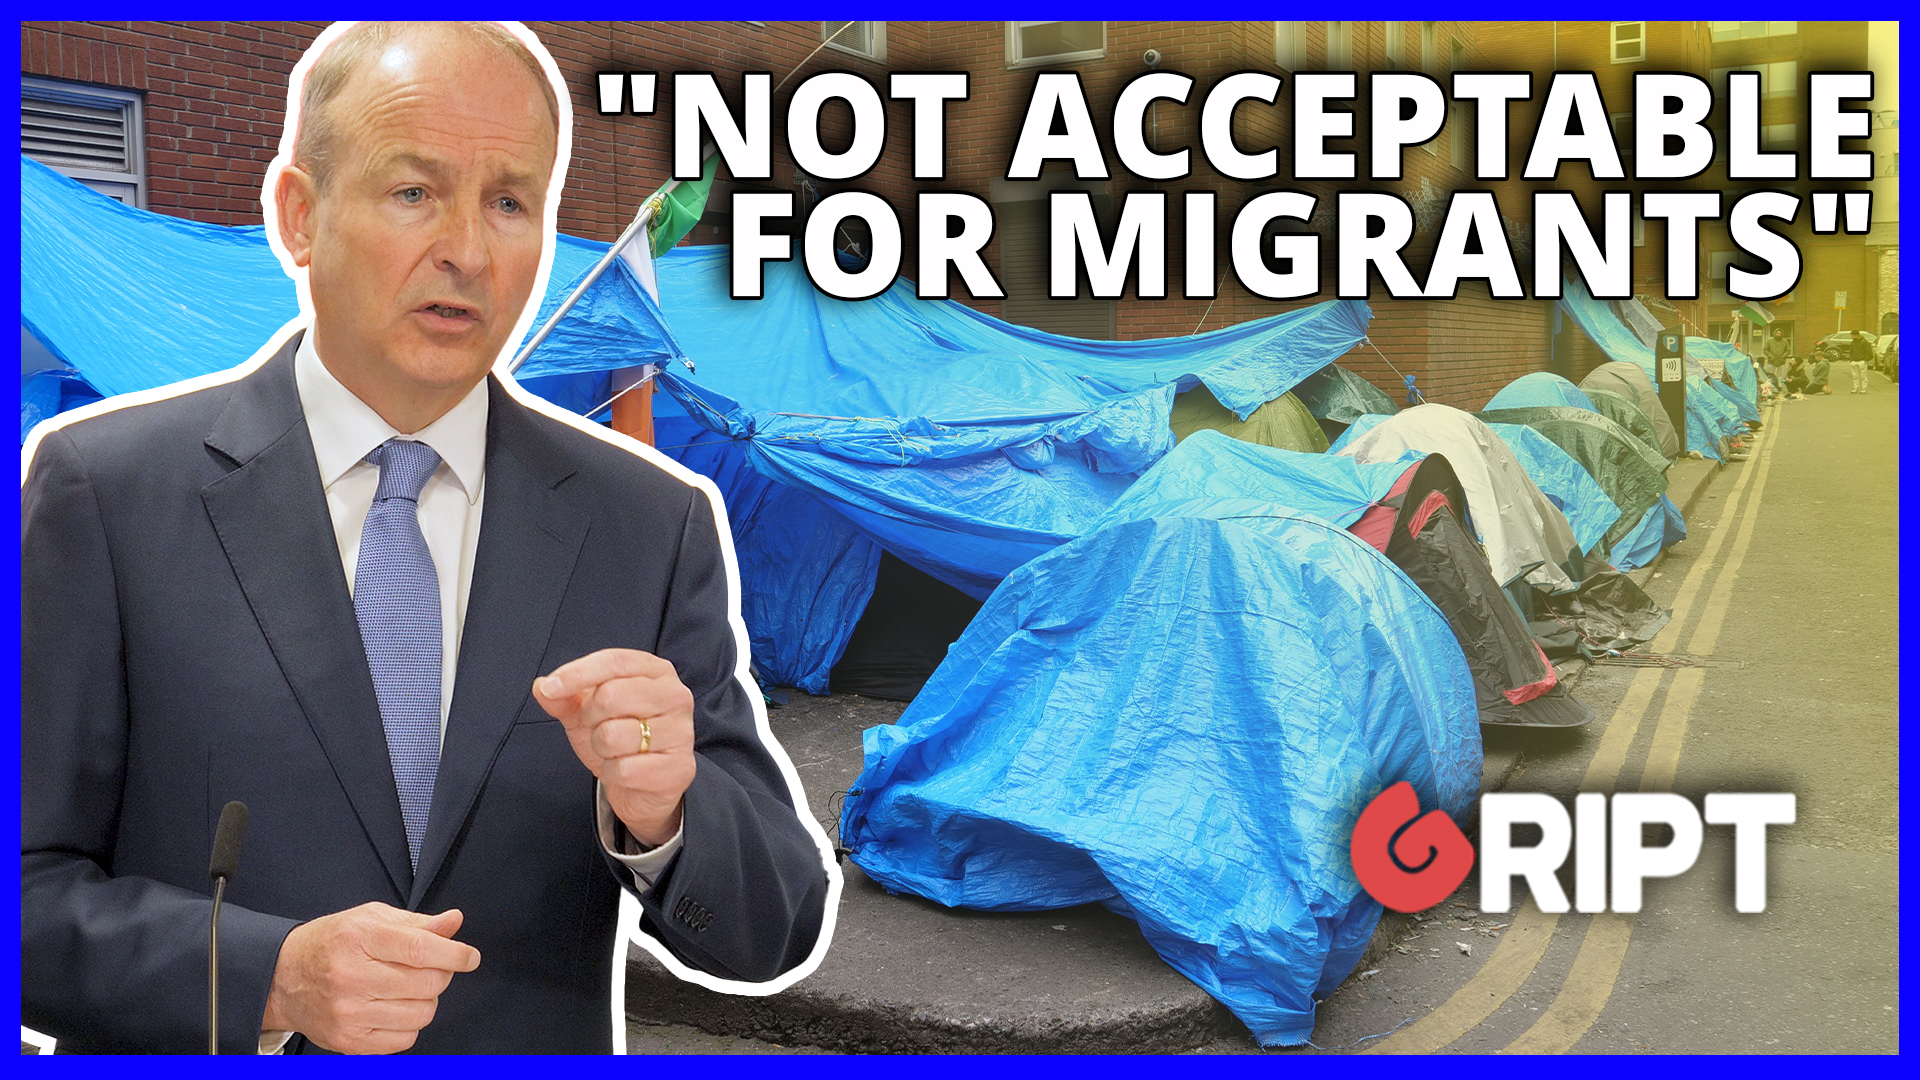 Mount Street tent city "not acceptable for migrants", says Martin